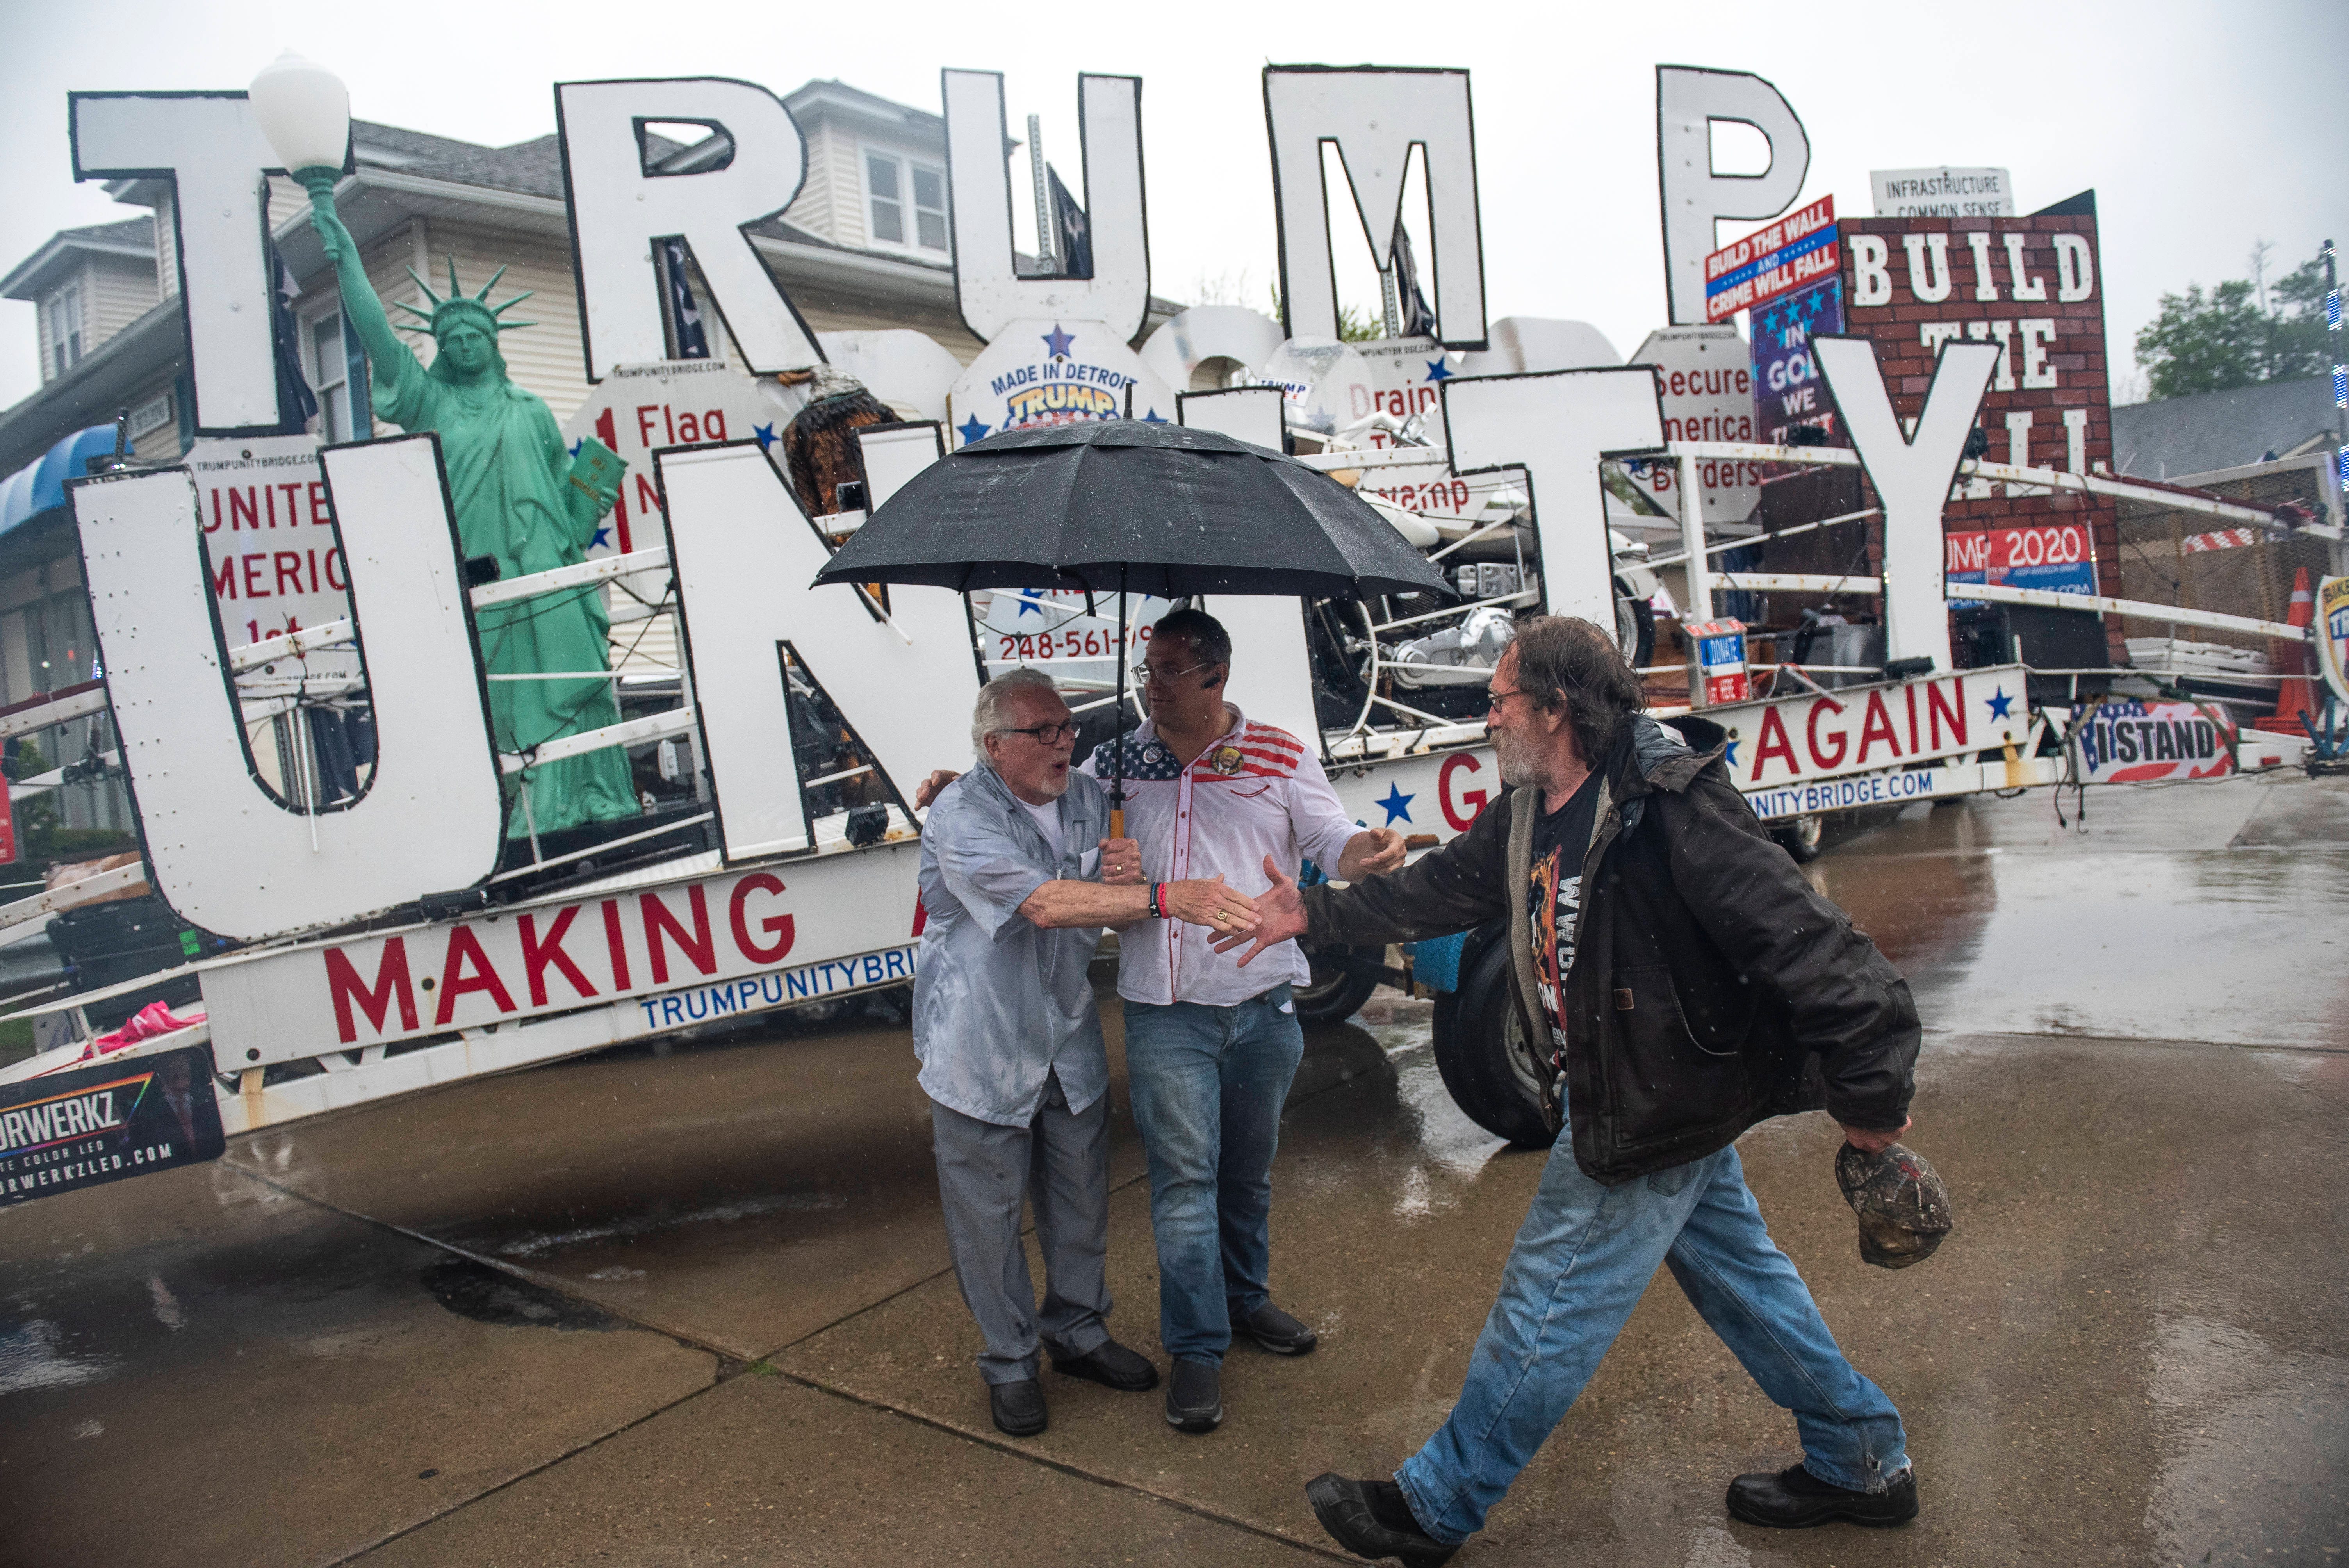 Owosso barber Karl Manke, left, reaches to shake hands with a supporter while posing for photos with Rob Cortis of Livonia, owner of the Trump Unity trailer.